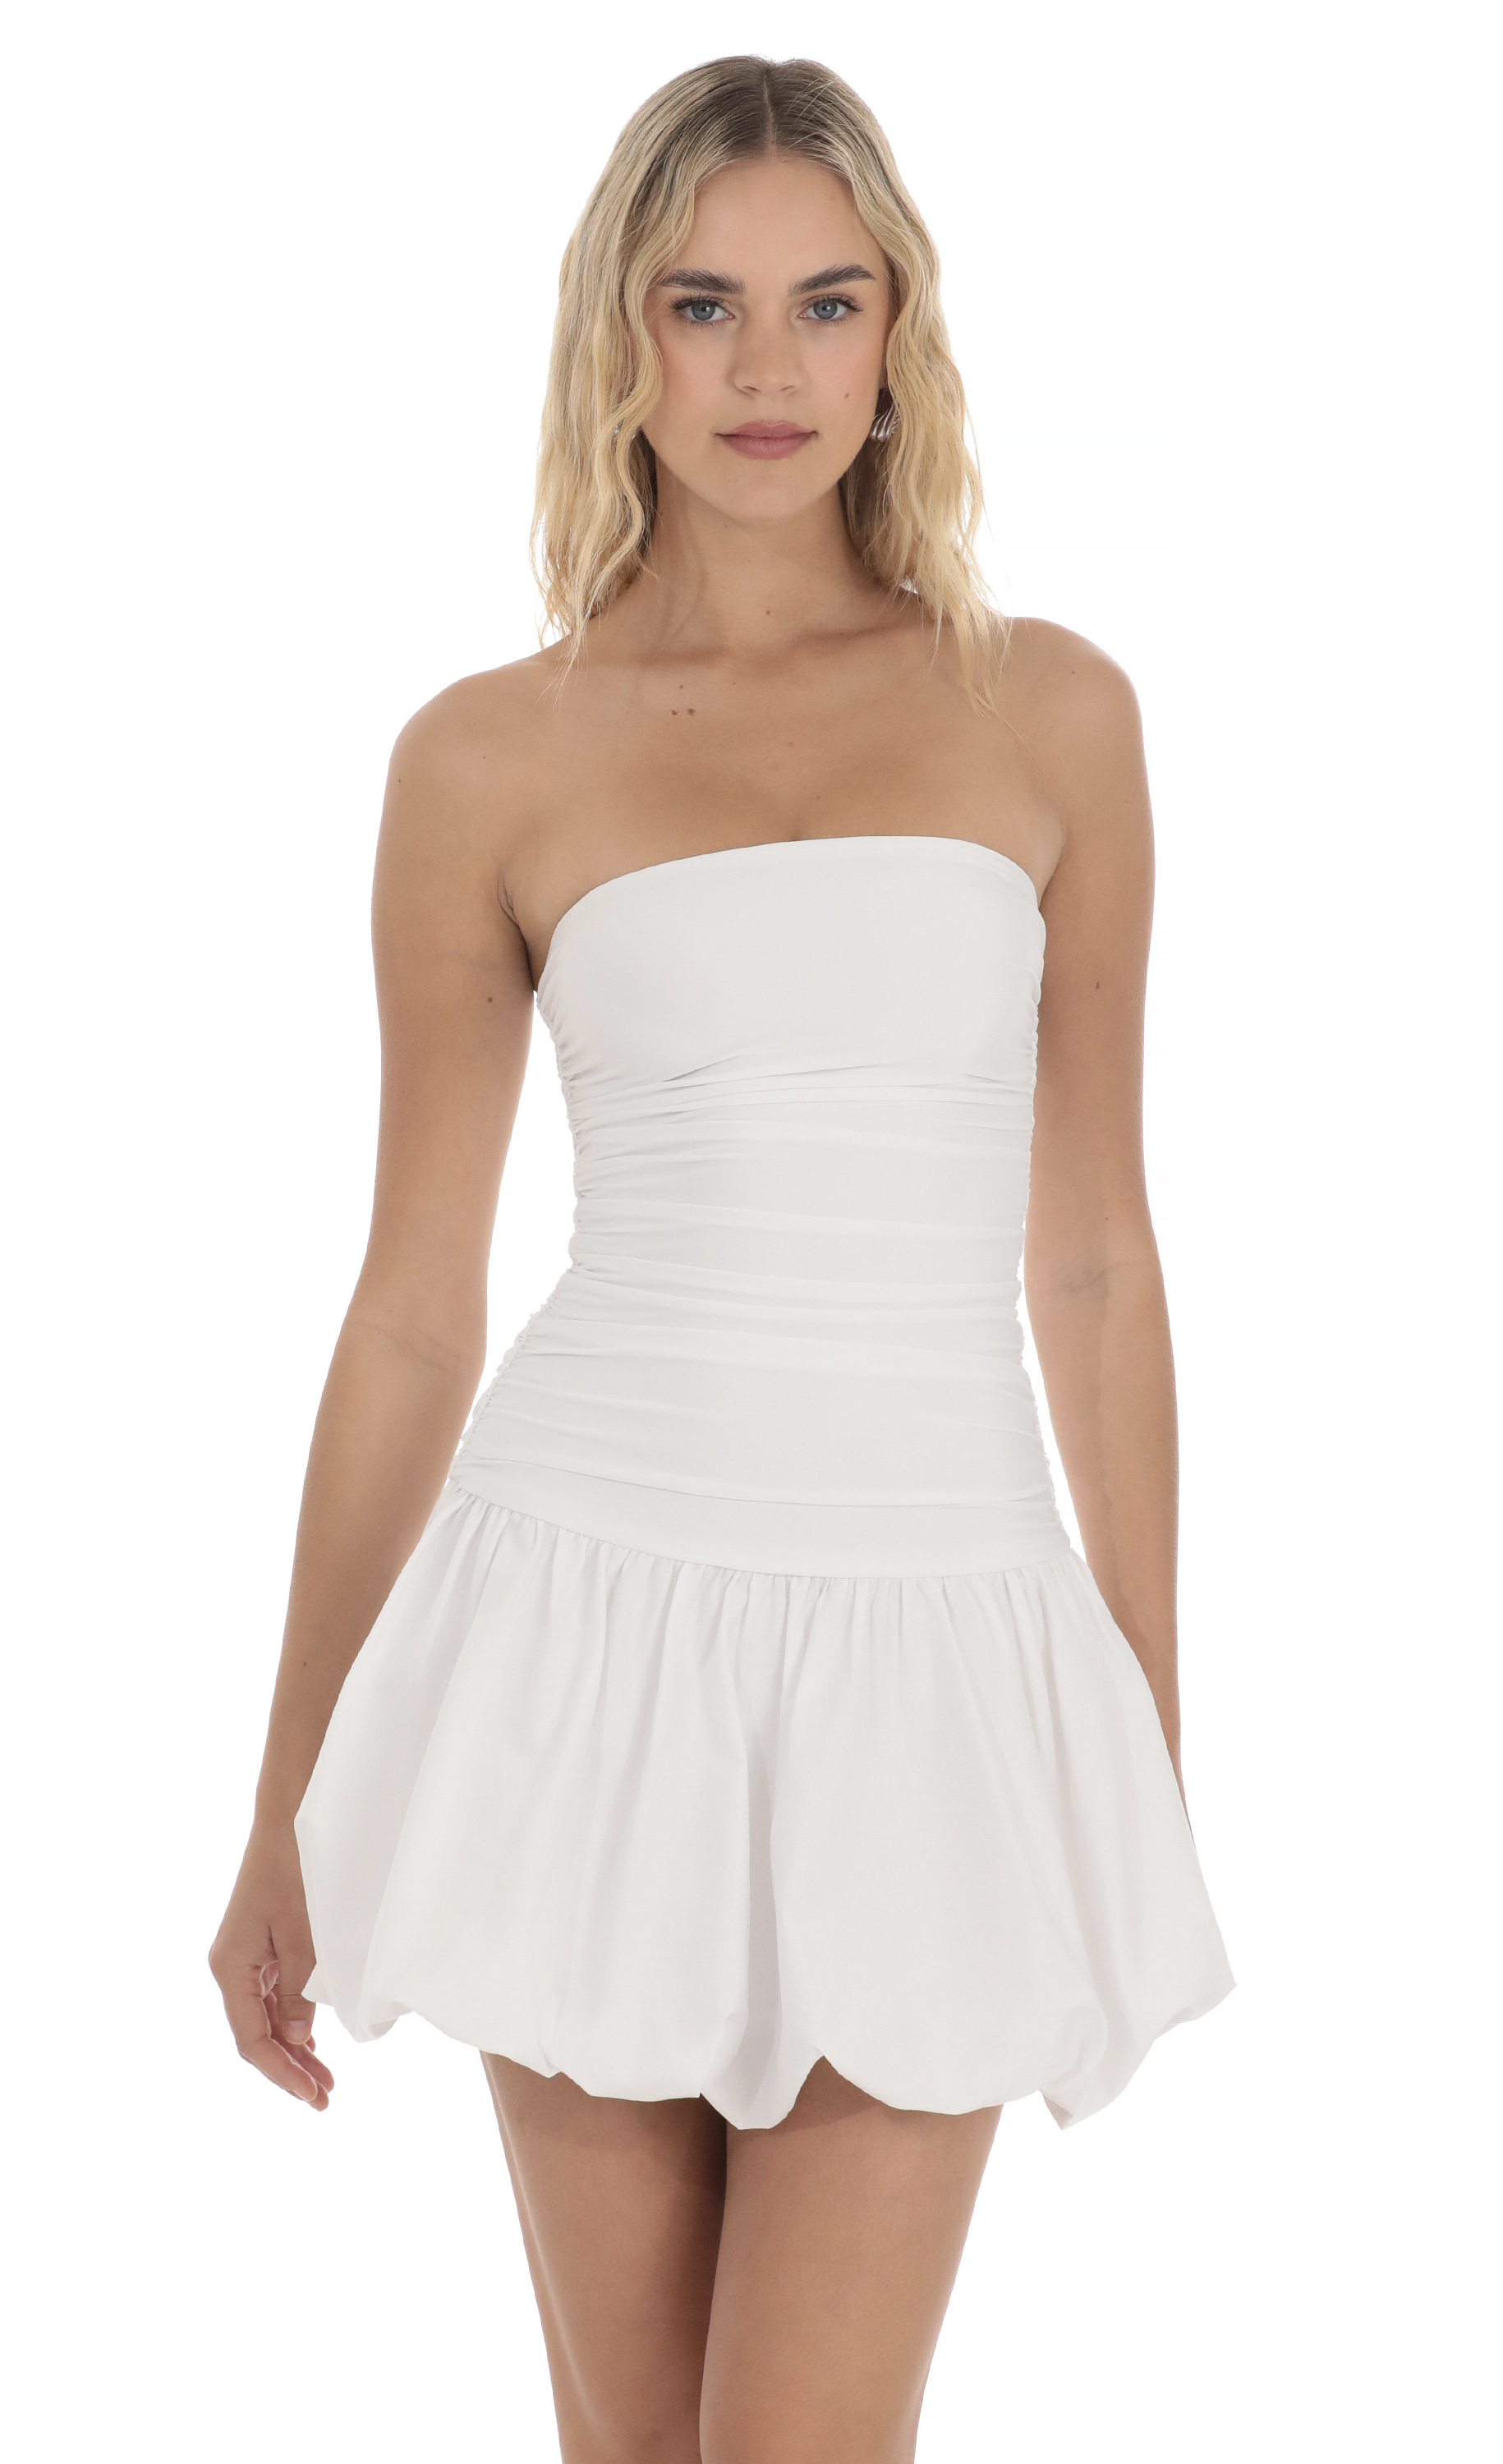 Strapless Bubble Dress in White